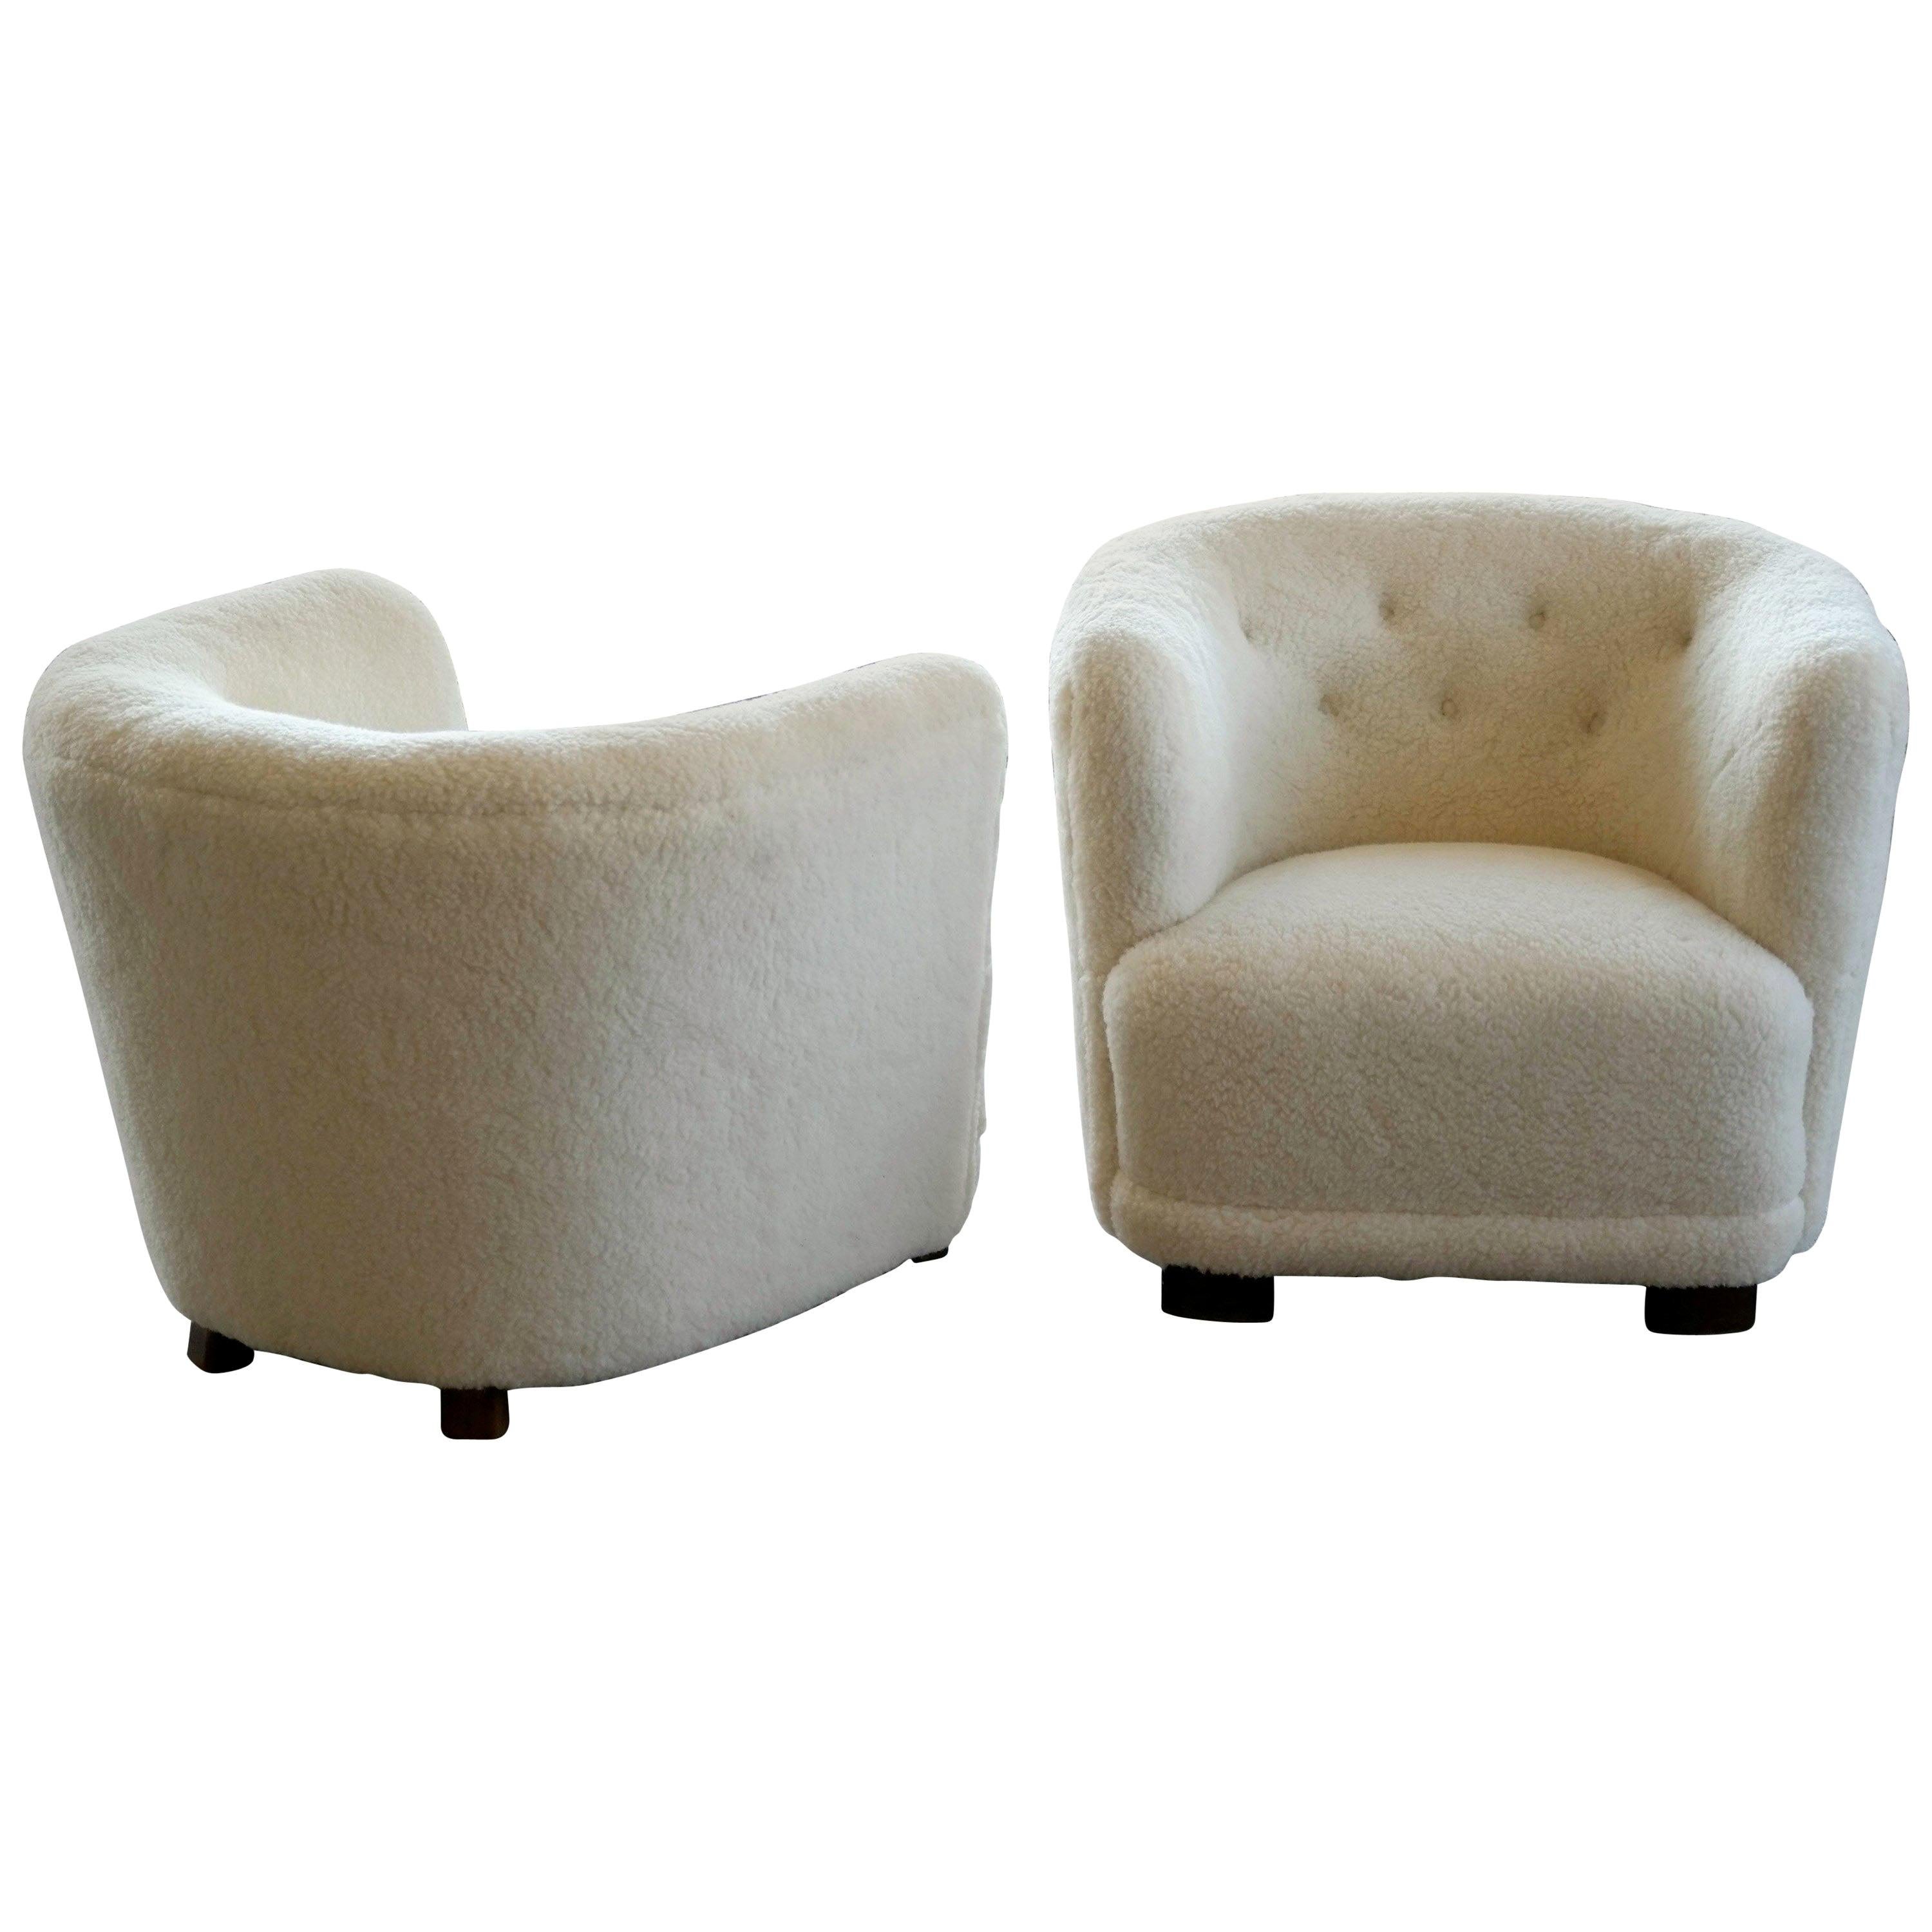 Danish 1940s Pair of Viggo Boesen Style Lounge or Club Chairs in Lambswool